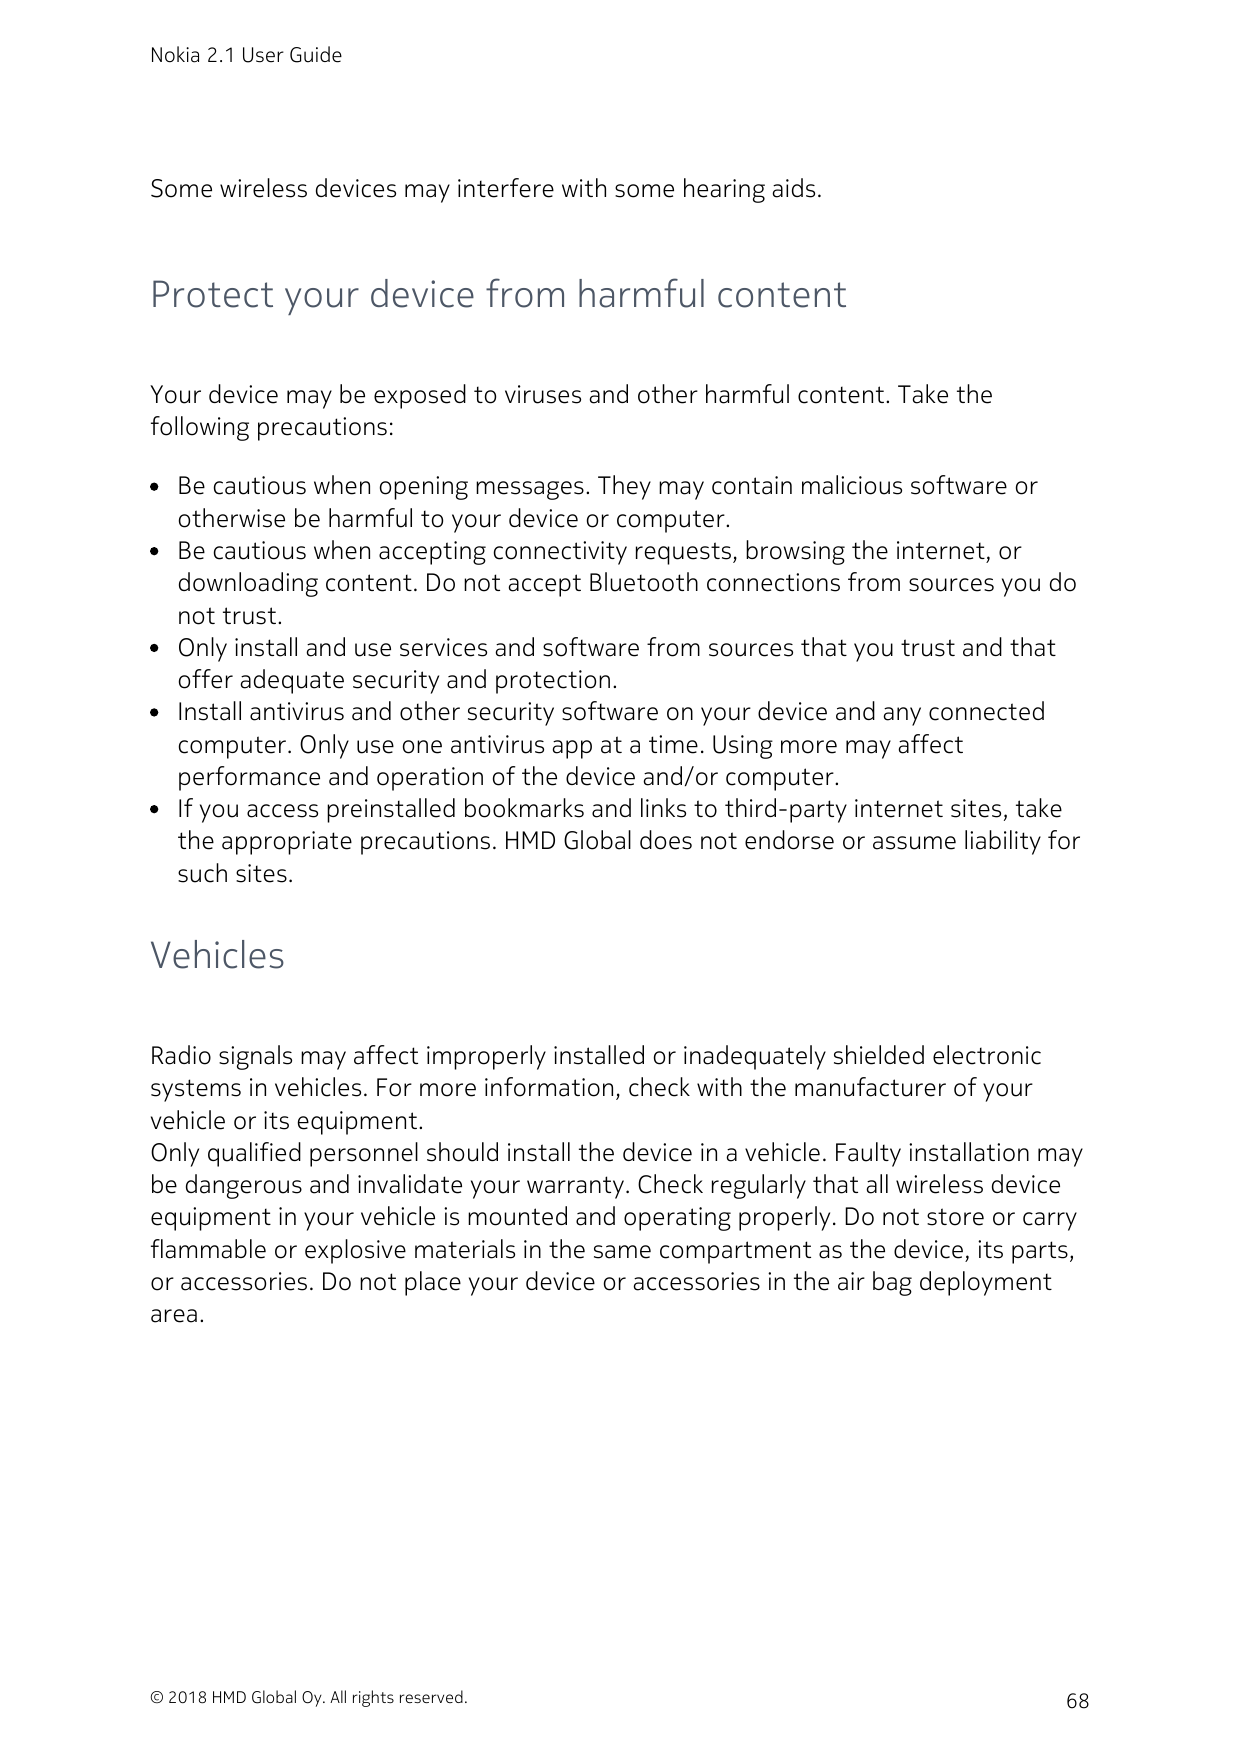 Nokia 2.1 User GuideSome wireless devices may interfere with some hearing aids.Protect your device from harmful contentYour devi